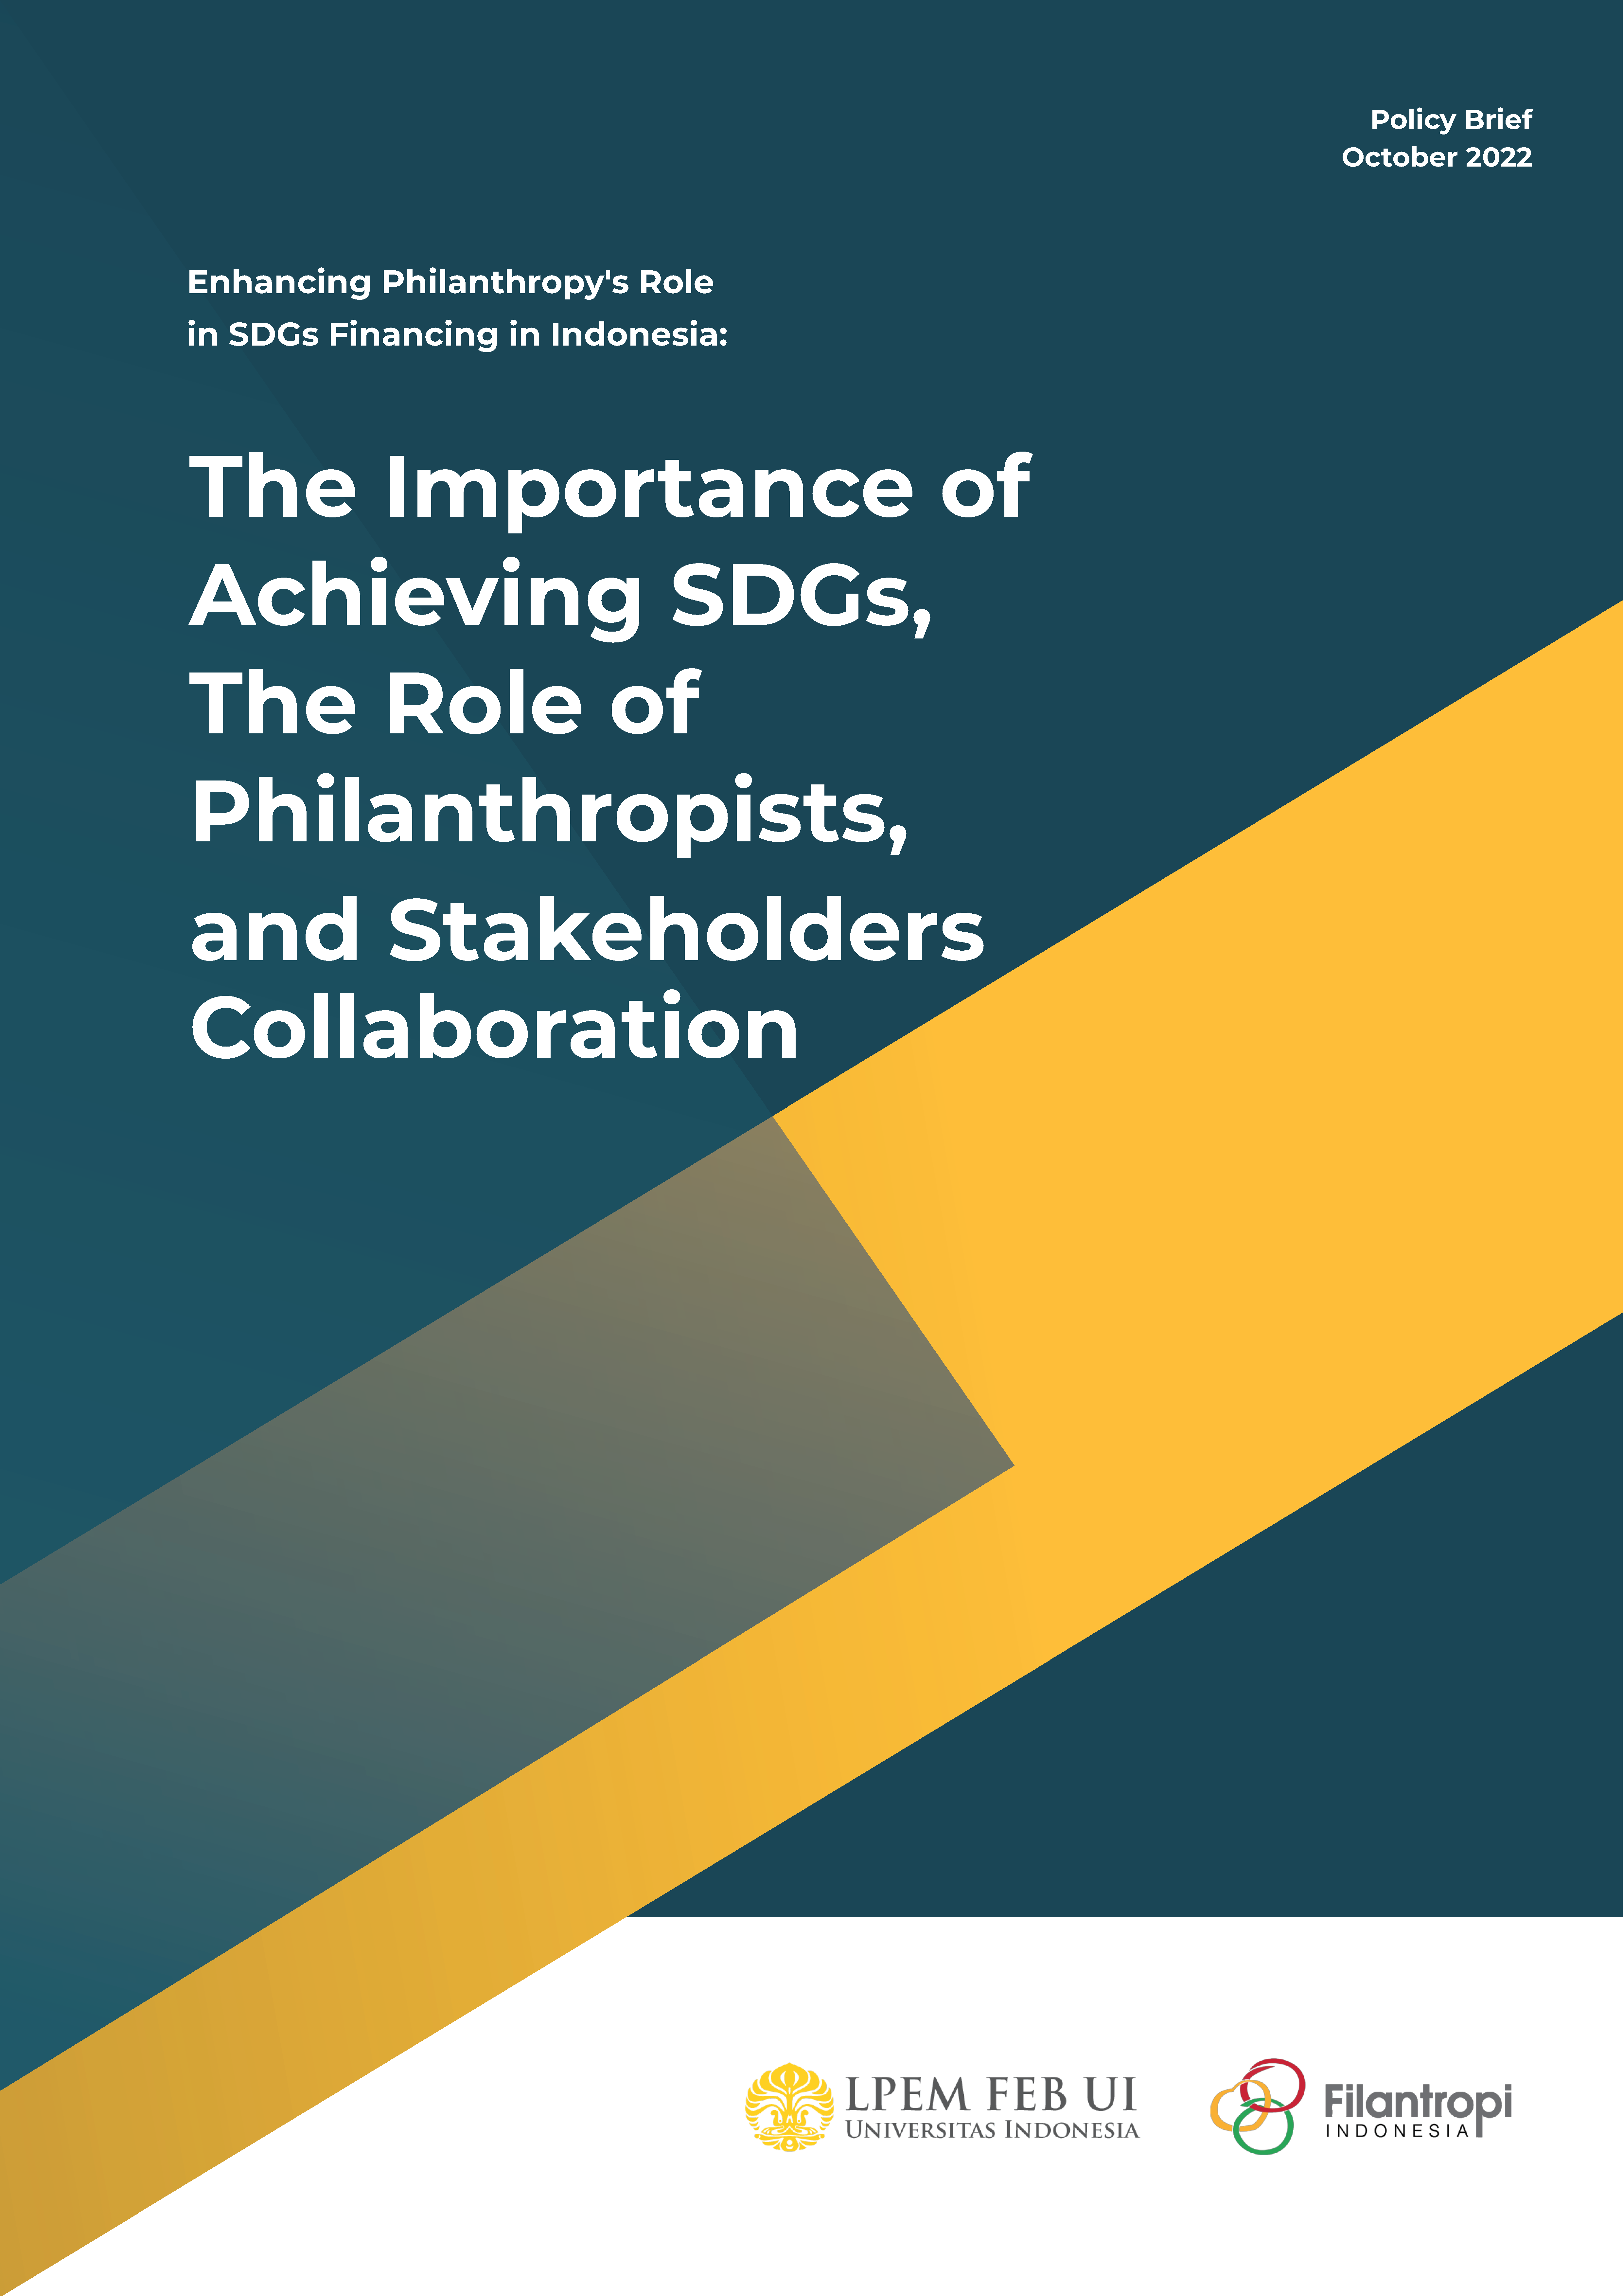 Enhancing Philanthropy’s Role in SDGs Financing in Indonesia: The Importance of Achieving SDGs, The Role of Philanthropists, and Stakeholders Collaboration